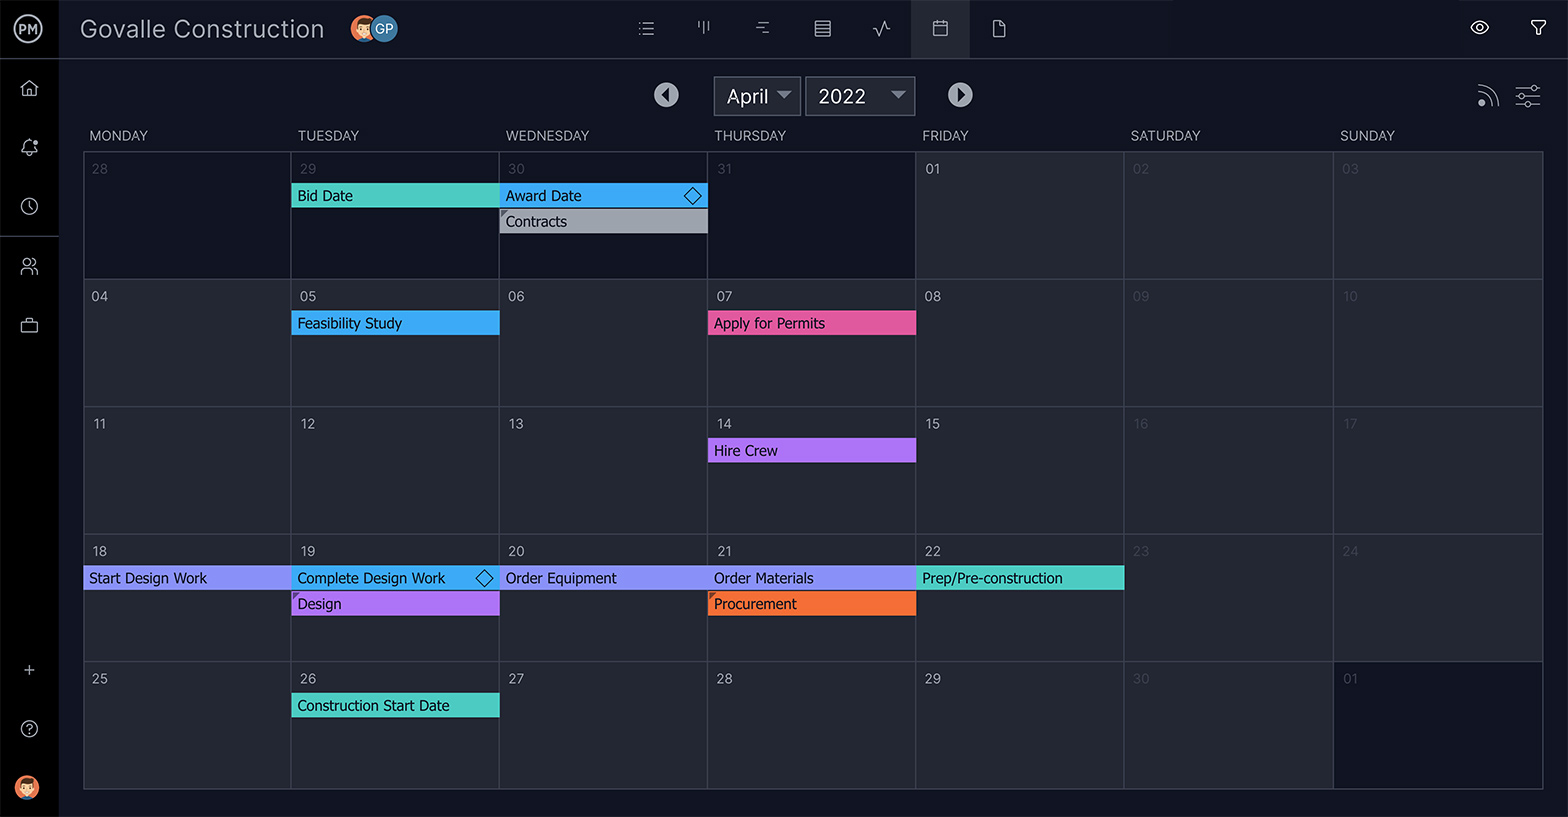 ProjectManager's calendar view helps with preconstruction